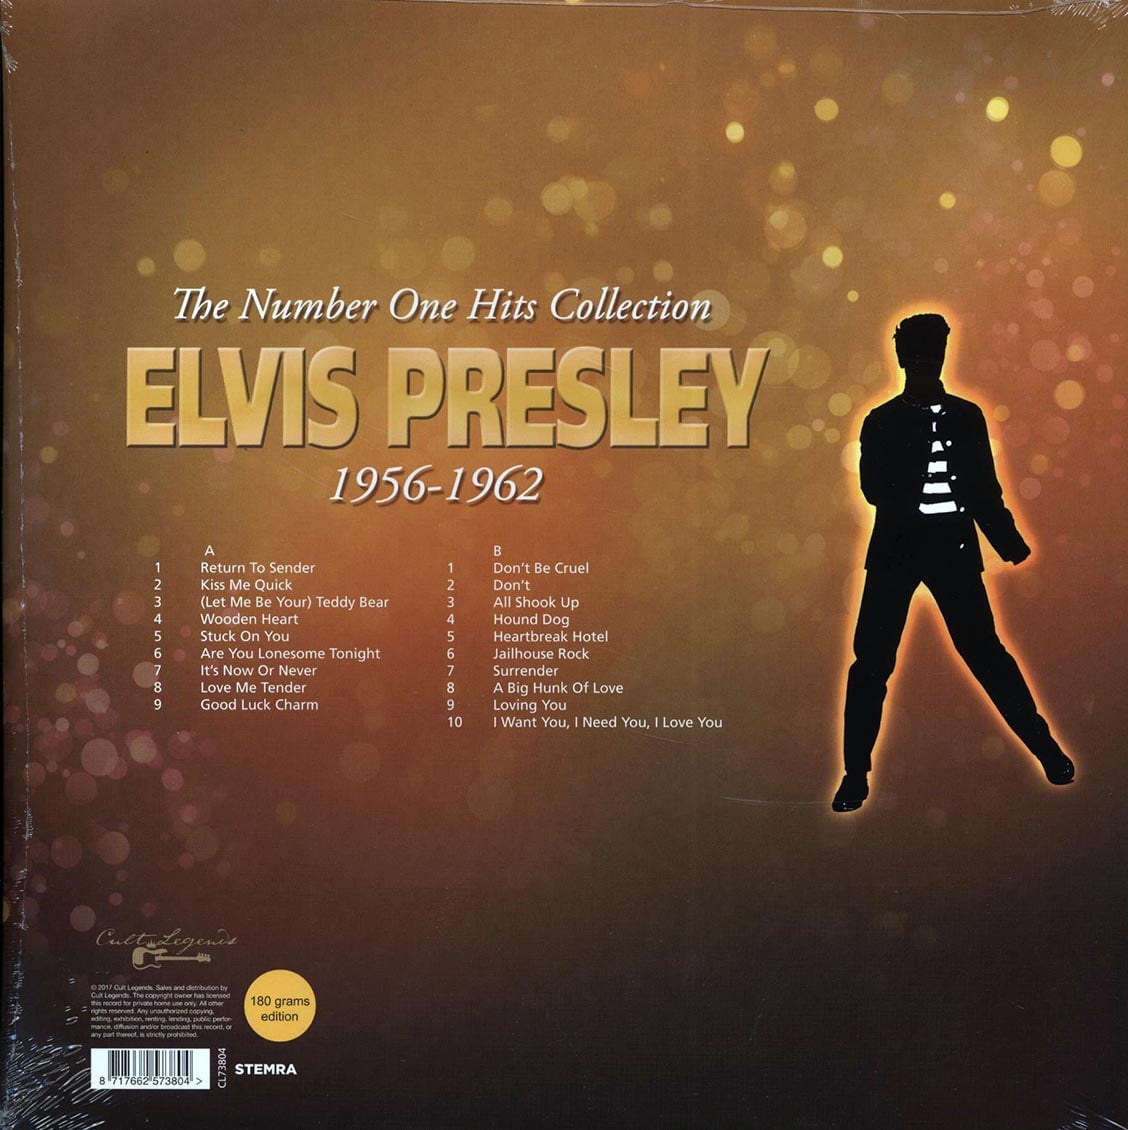 Elvis Presley - The Number One Hits Collection 1956-1962 - Vinyl LP